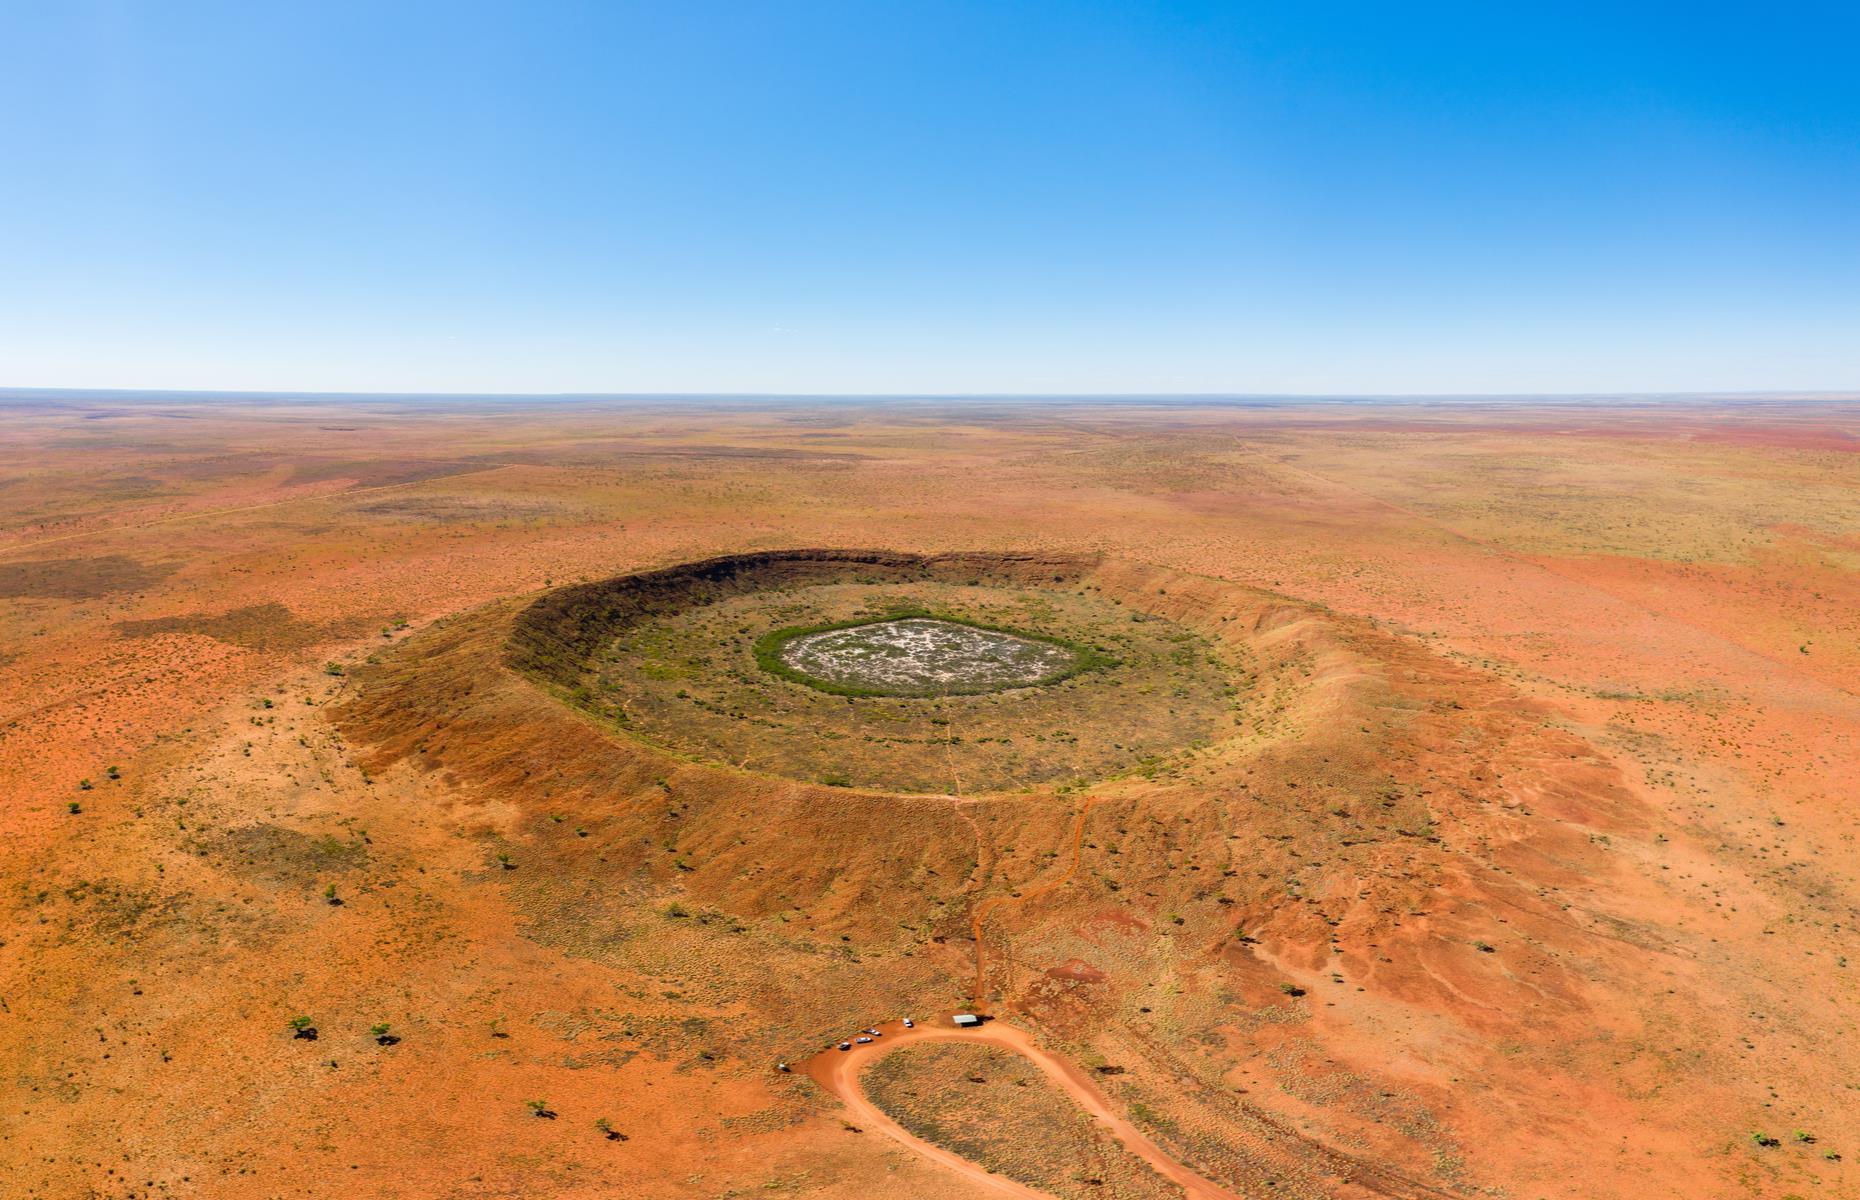 In a country of vast and varied landscapes it’s not surprising that there are many incredible places few people venture to see. From mysterious geological wonders and strange natural phenomena to historic hidden gems and hard-to-reach rock art, we uncover some of Australia’s most amazing under-the-radar attractions.